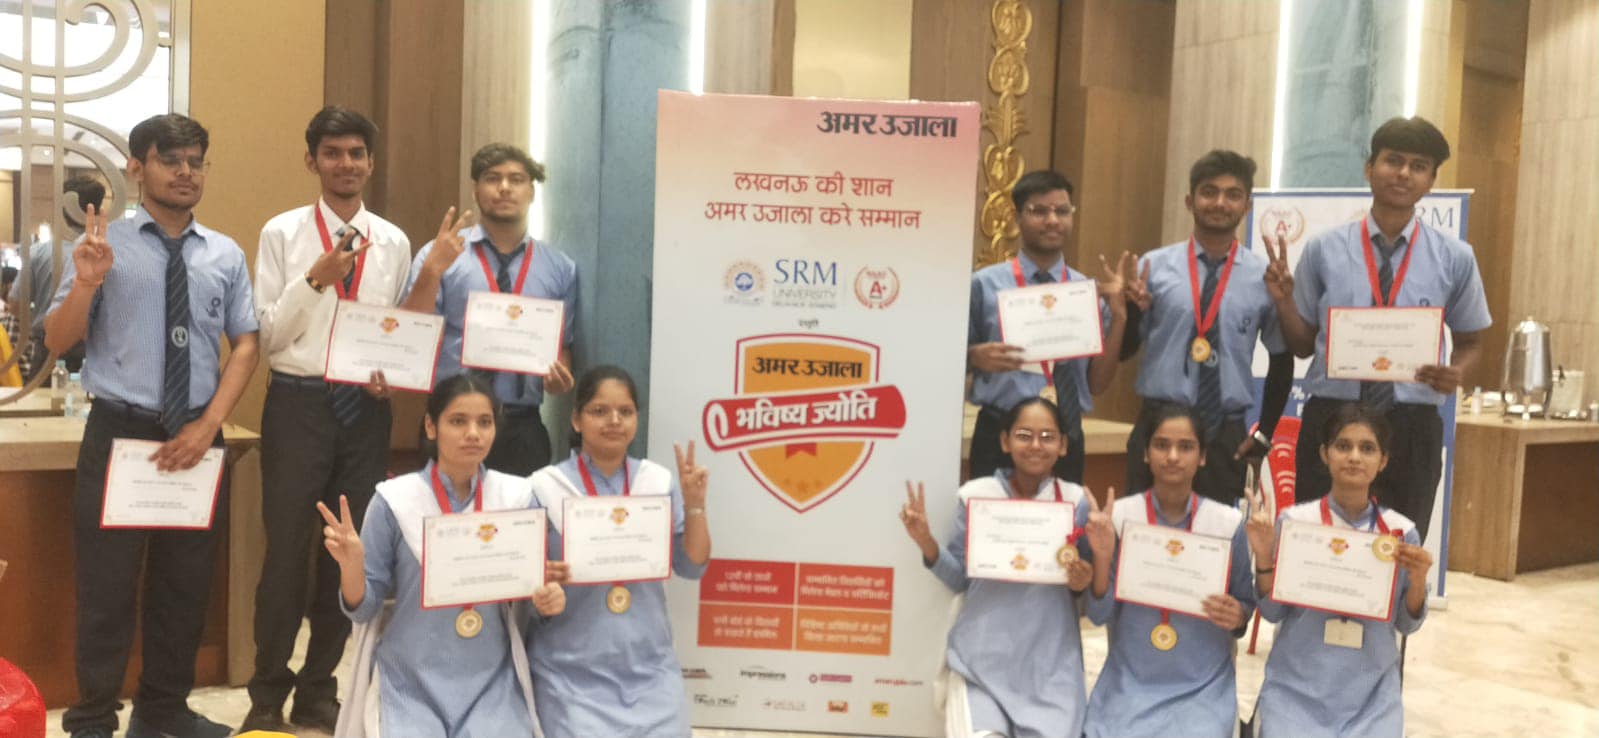 BOARD TOPPERS FELICITATED BY AMAR UJALA